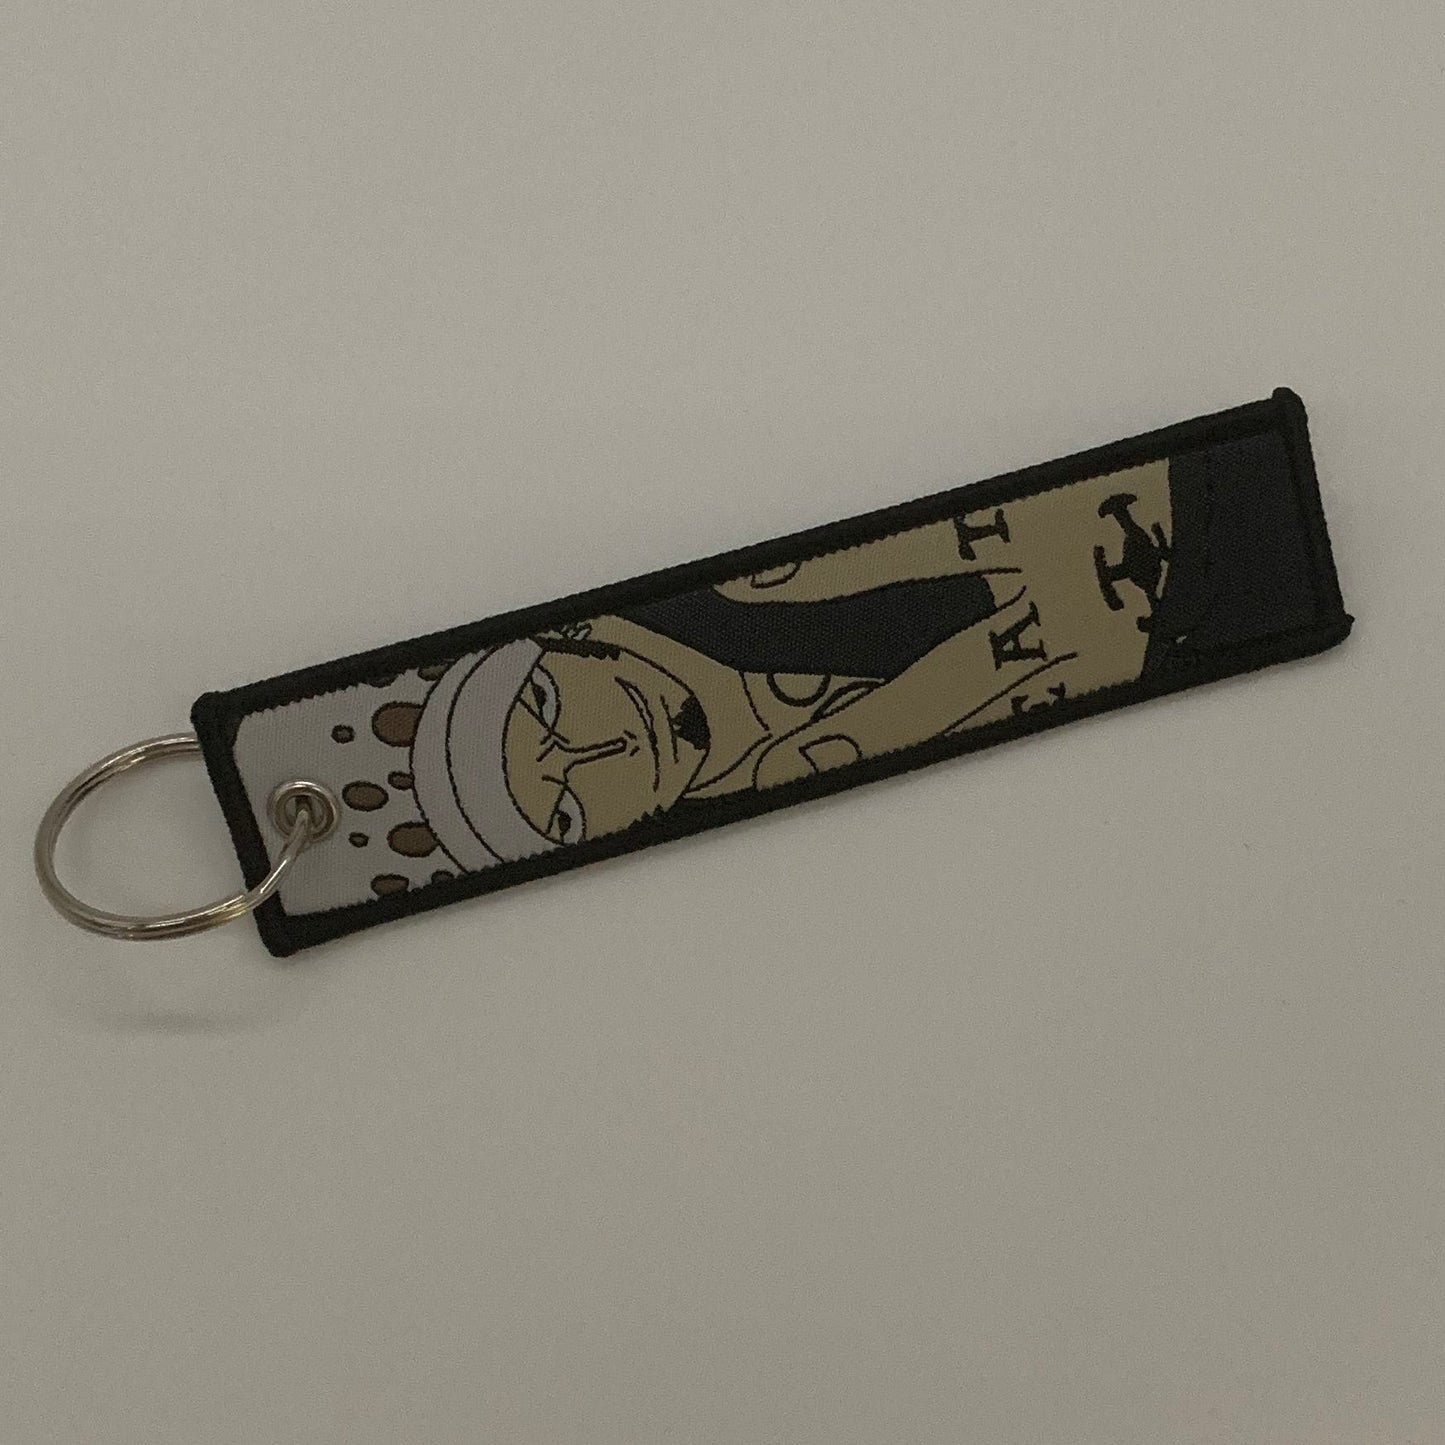 LIMITED Onepiece Trafalgar Water D. Law EMBROIDERED KEY CHAIN